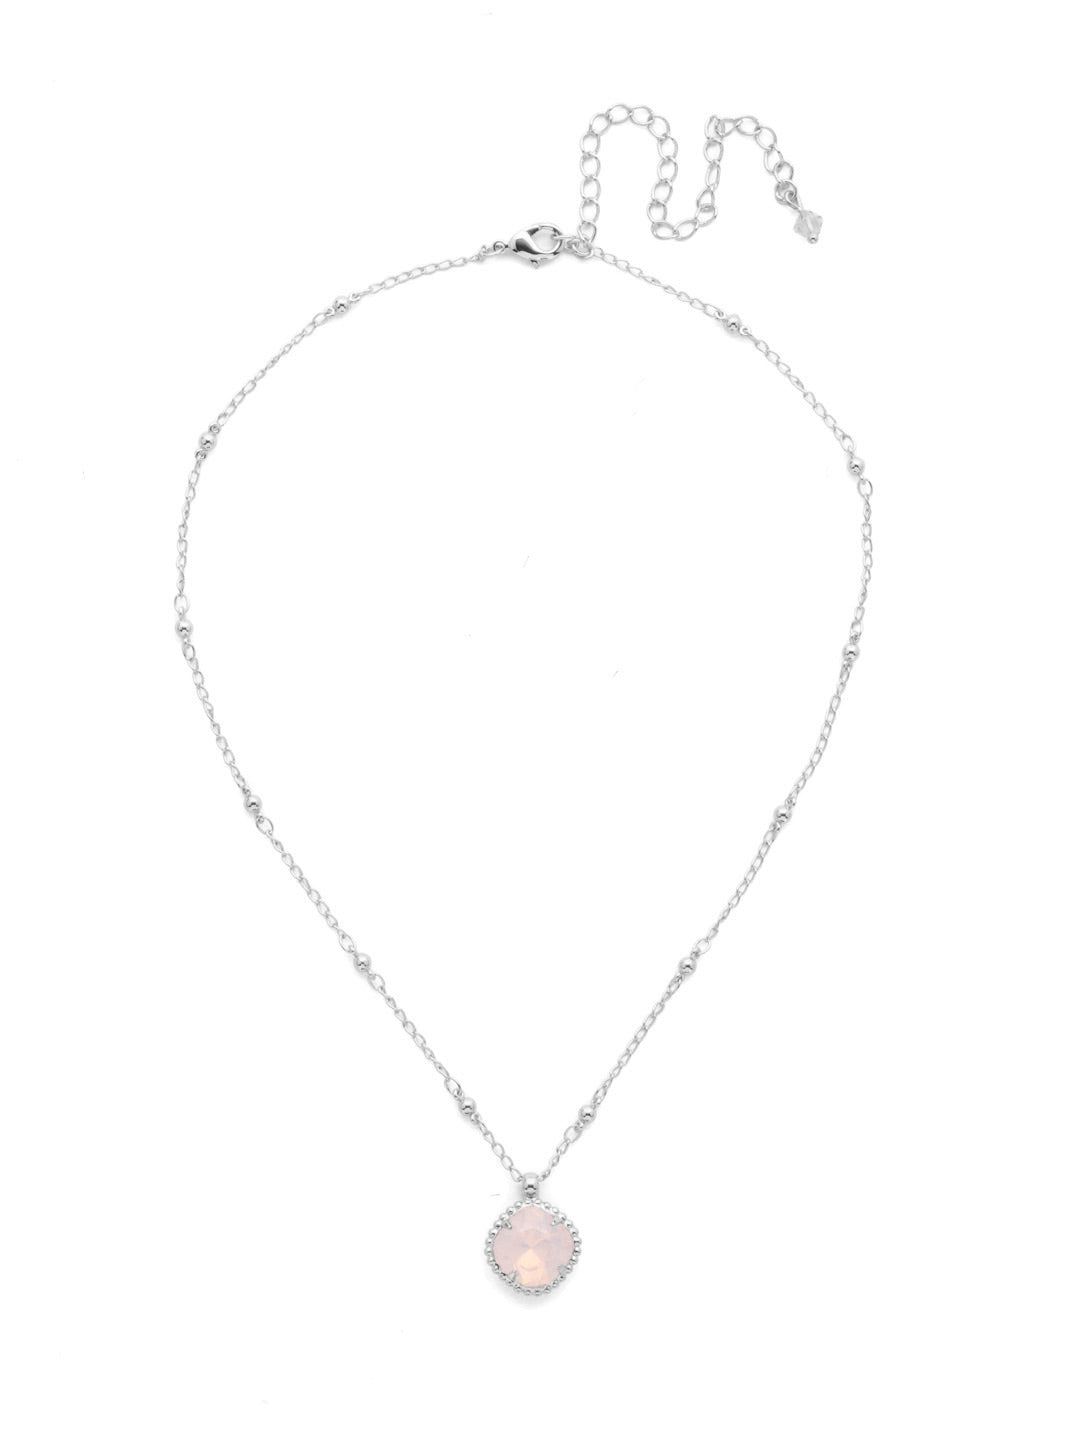 Cushion-Cut Pendant Necklace - NDS50PDROW